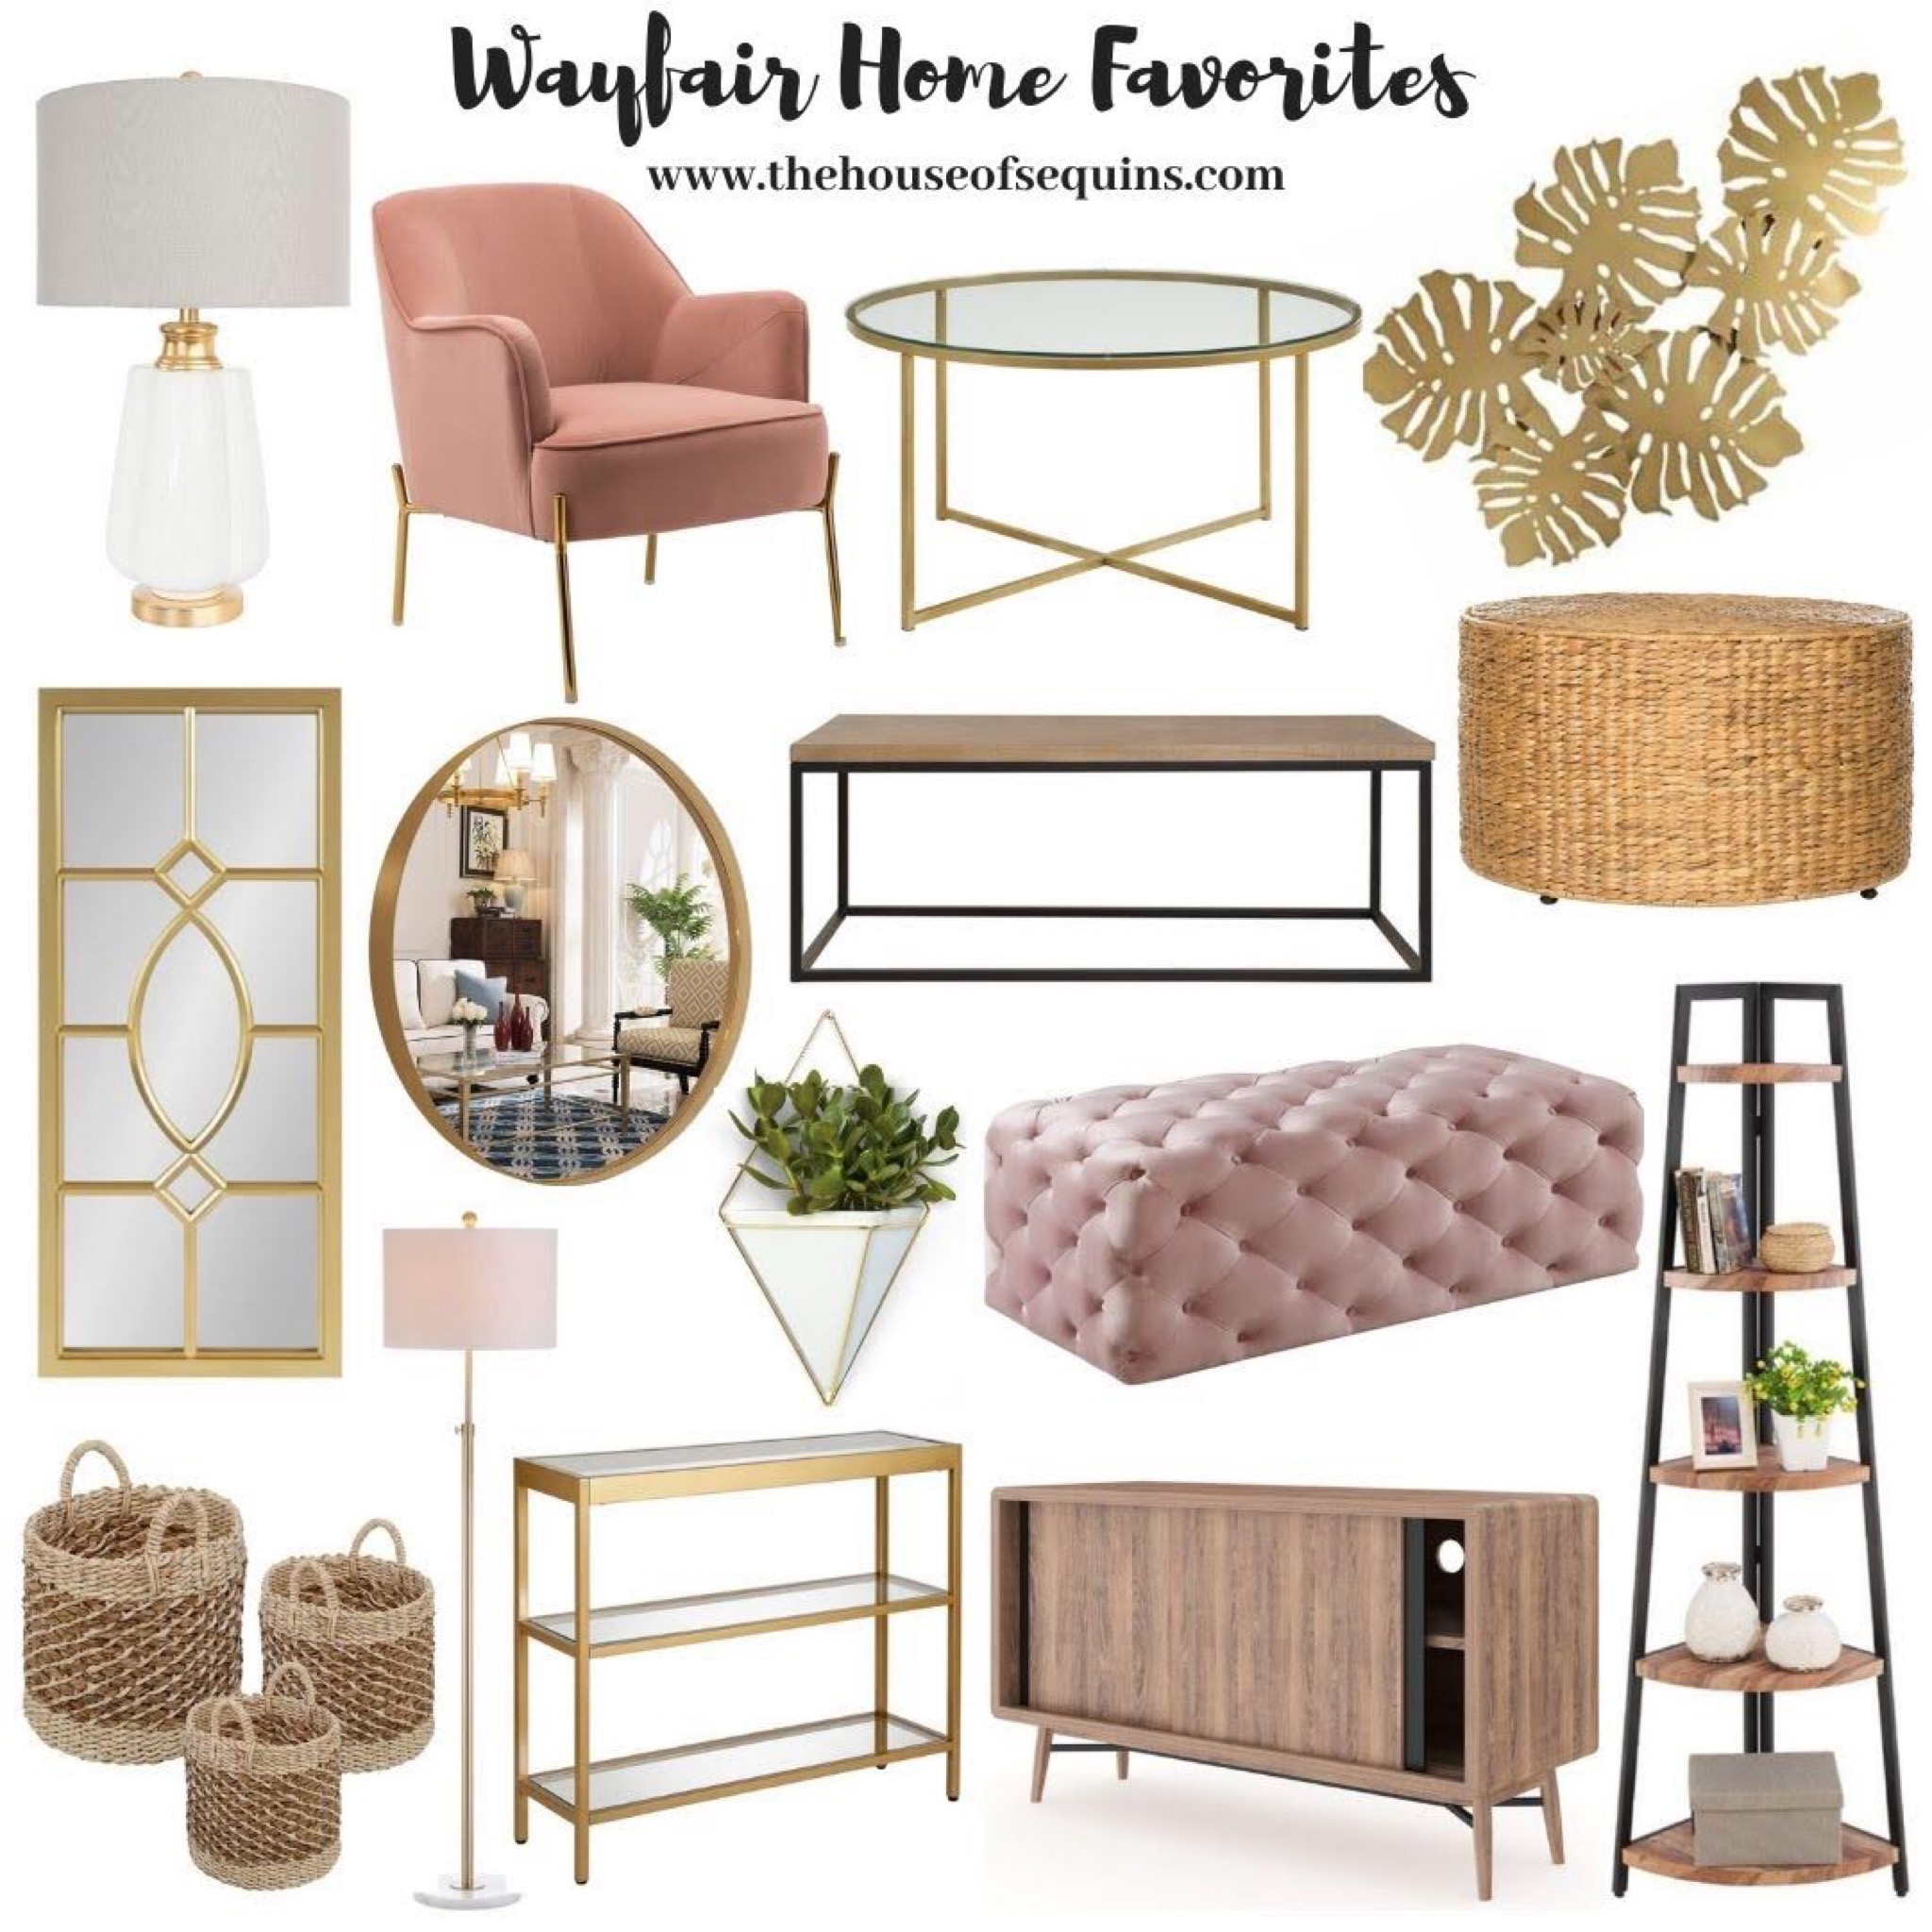 Home Decor Favorites from Wayfair - The House of Sequins